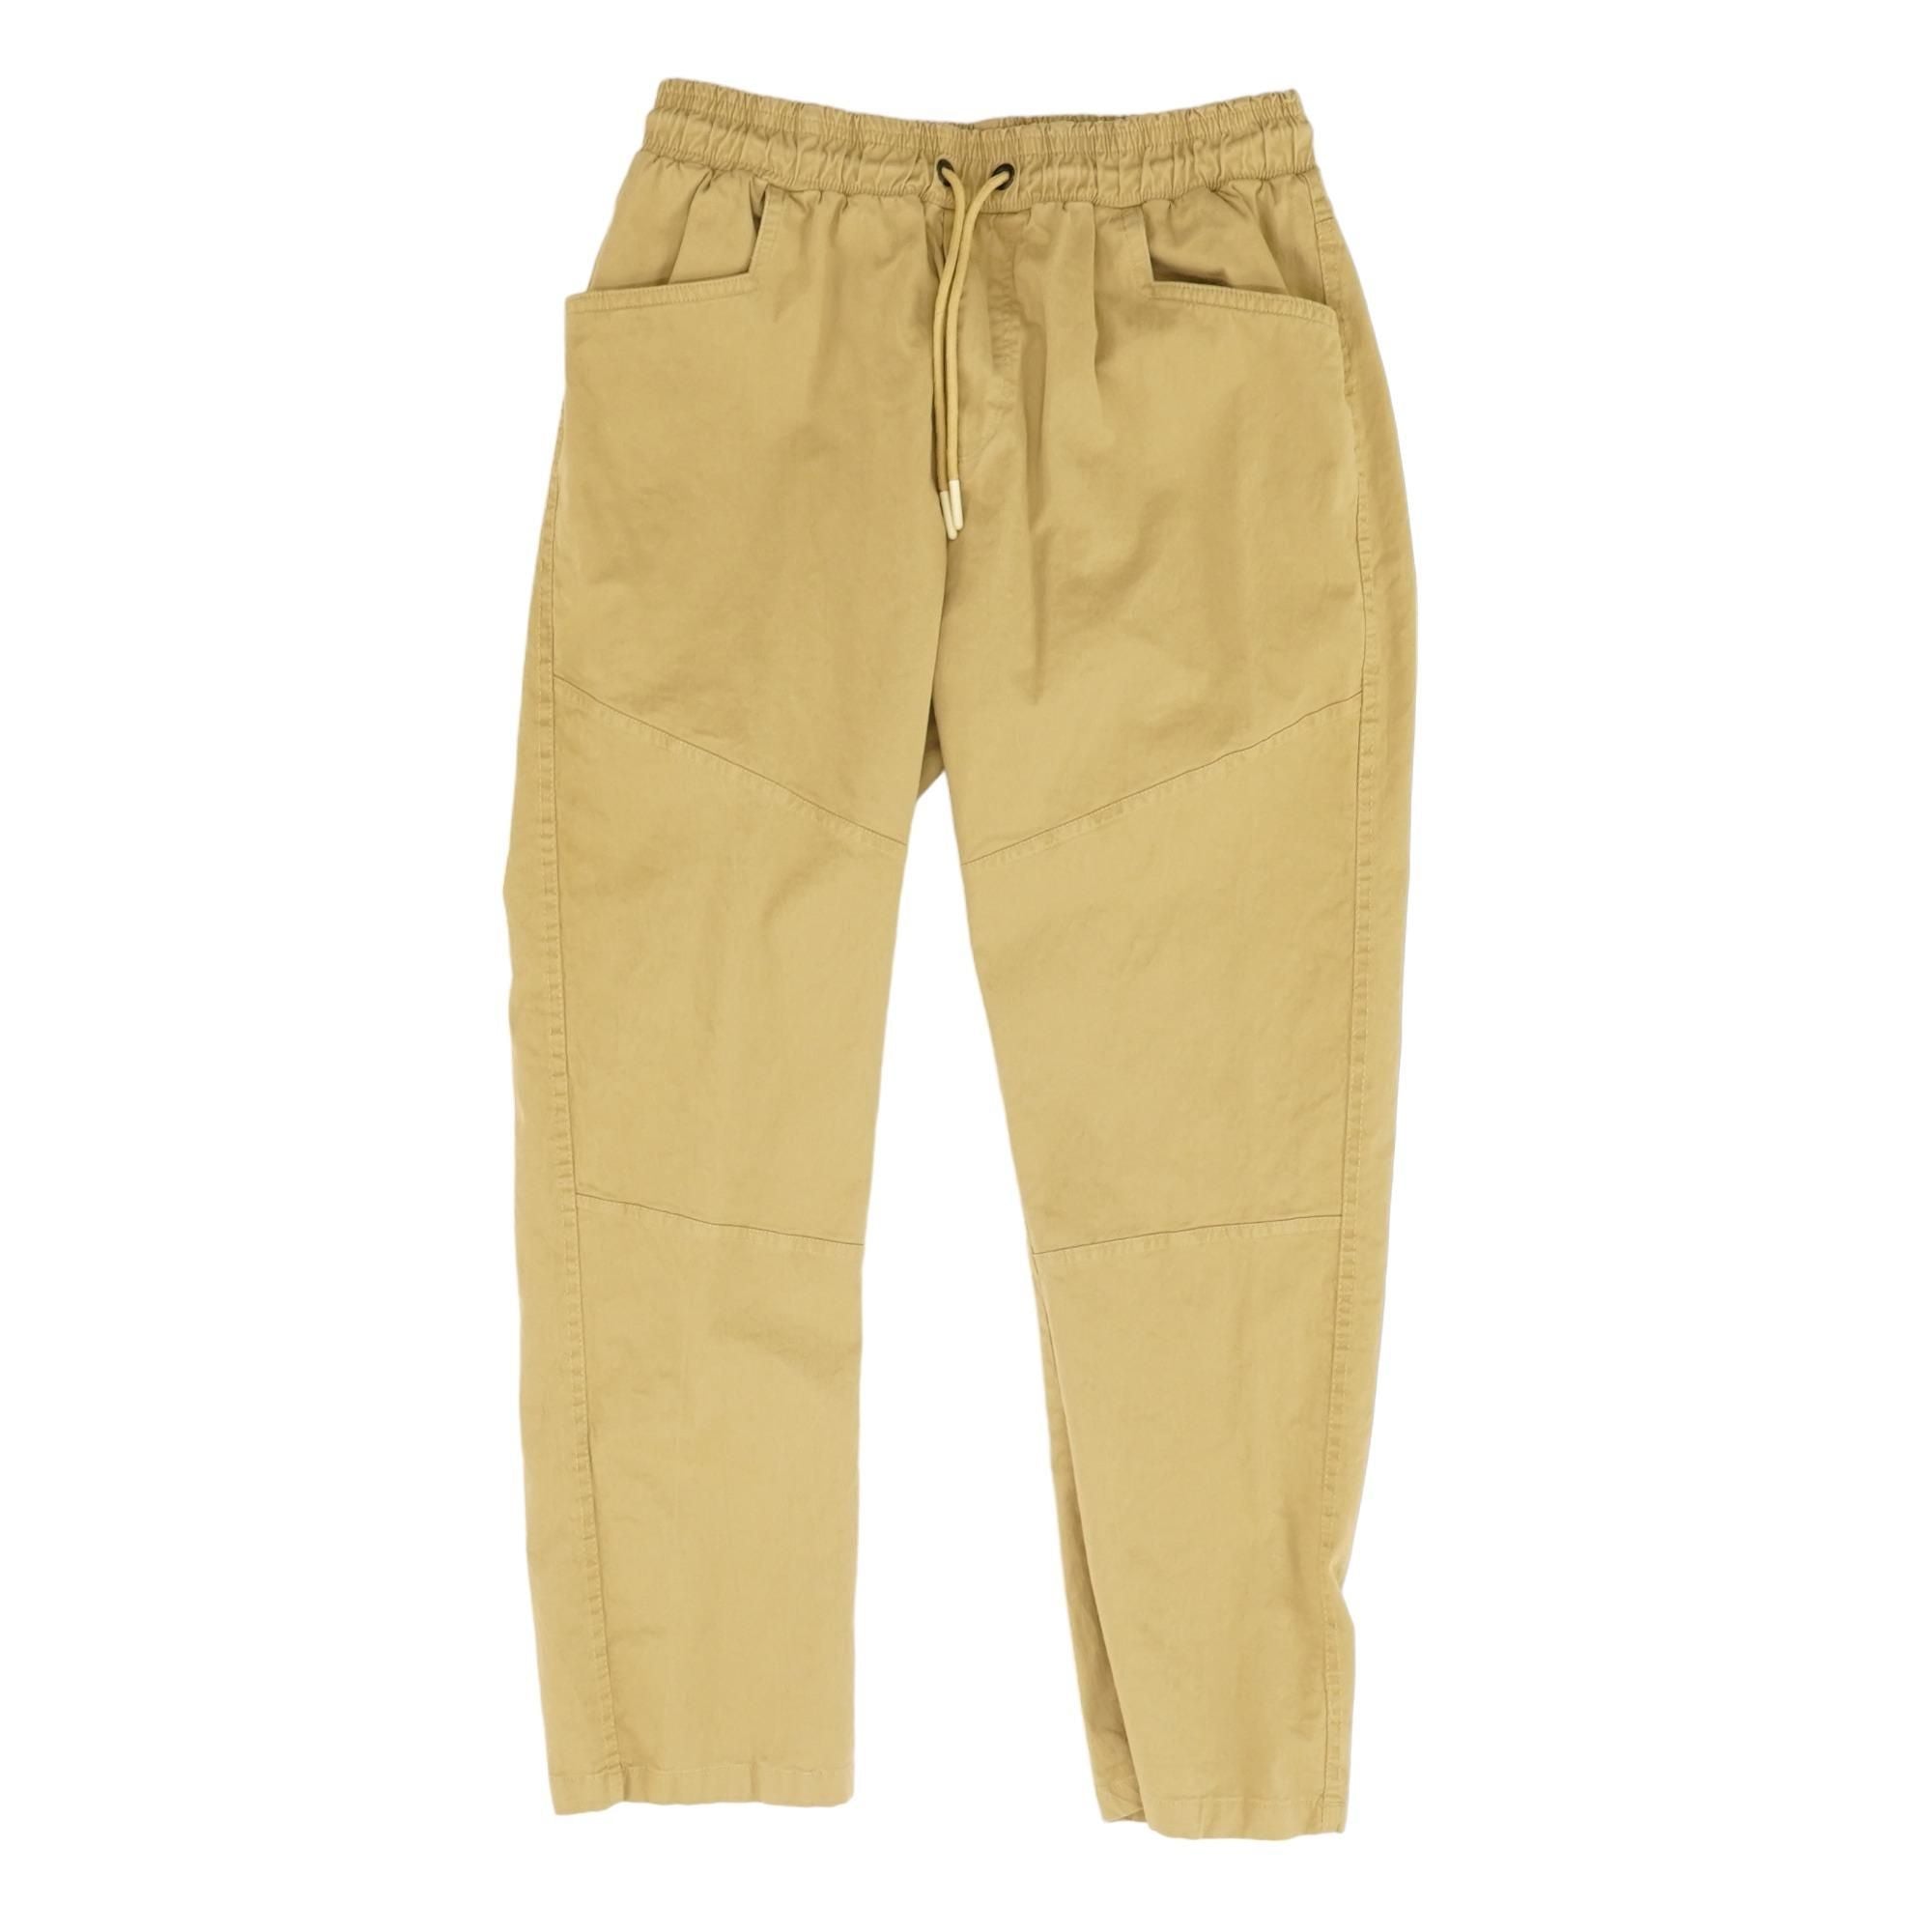 Buy ALLEN SOLLY Khaki Solid Cotton Slim Fit Boys Trousers | Shoppers Stop